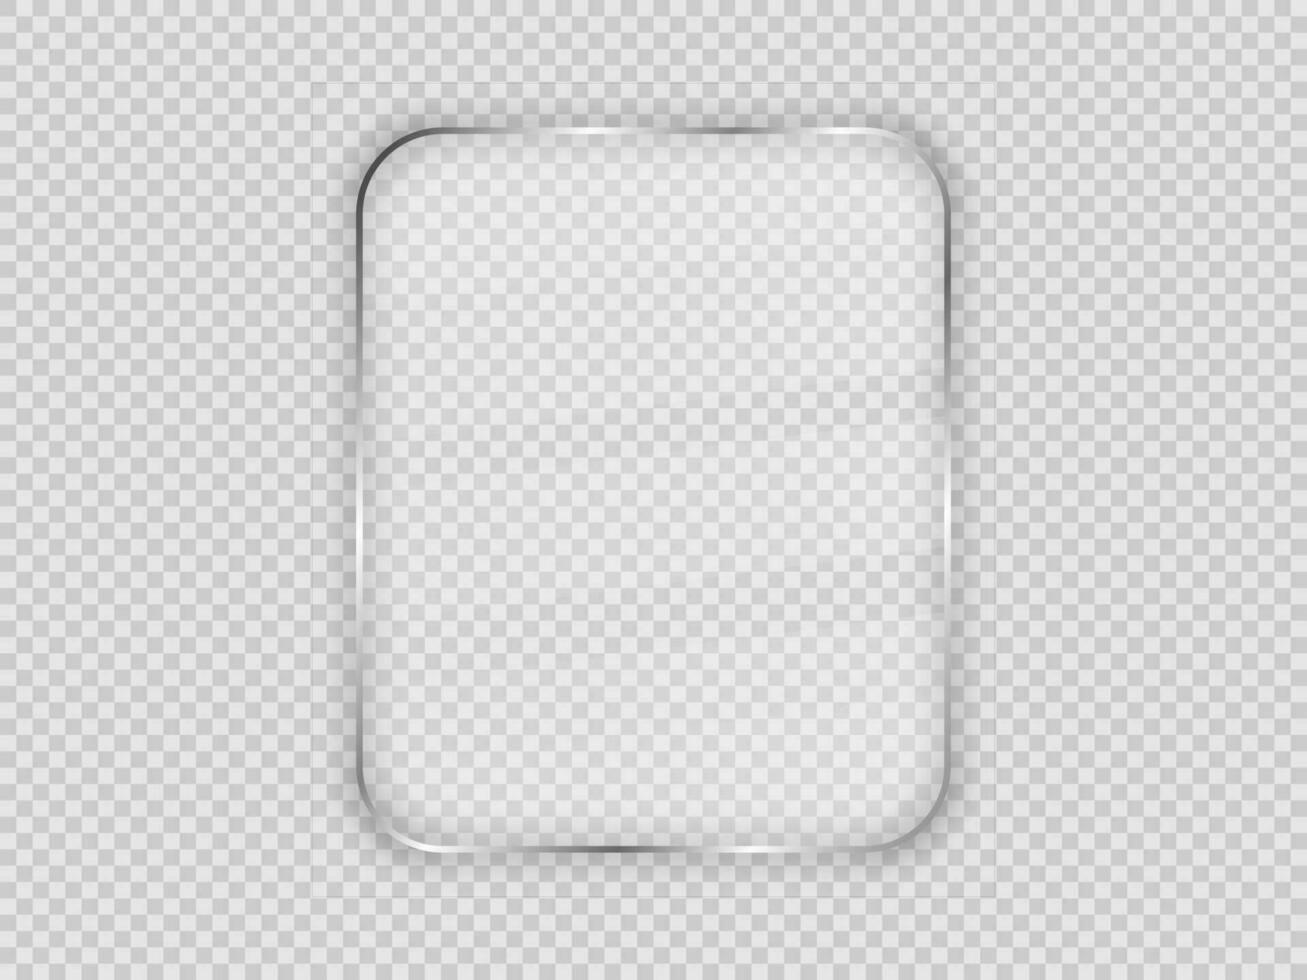 Glass plate in rounded vertical frame vector